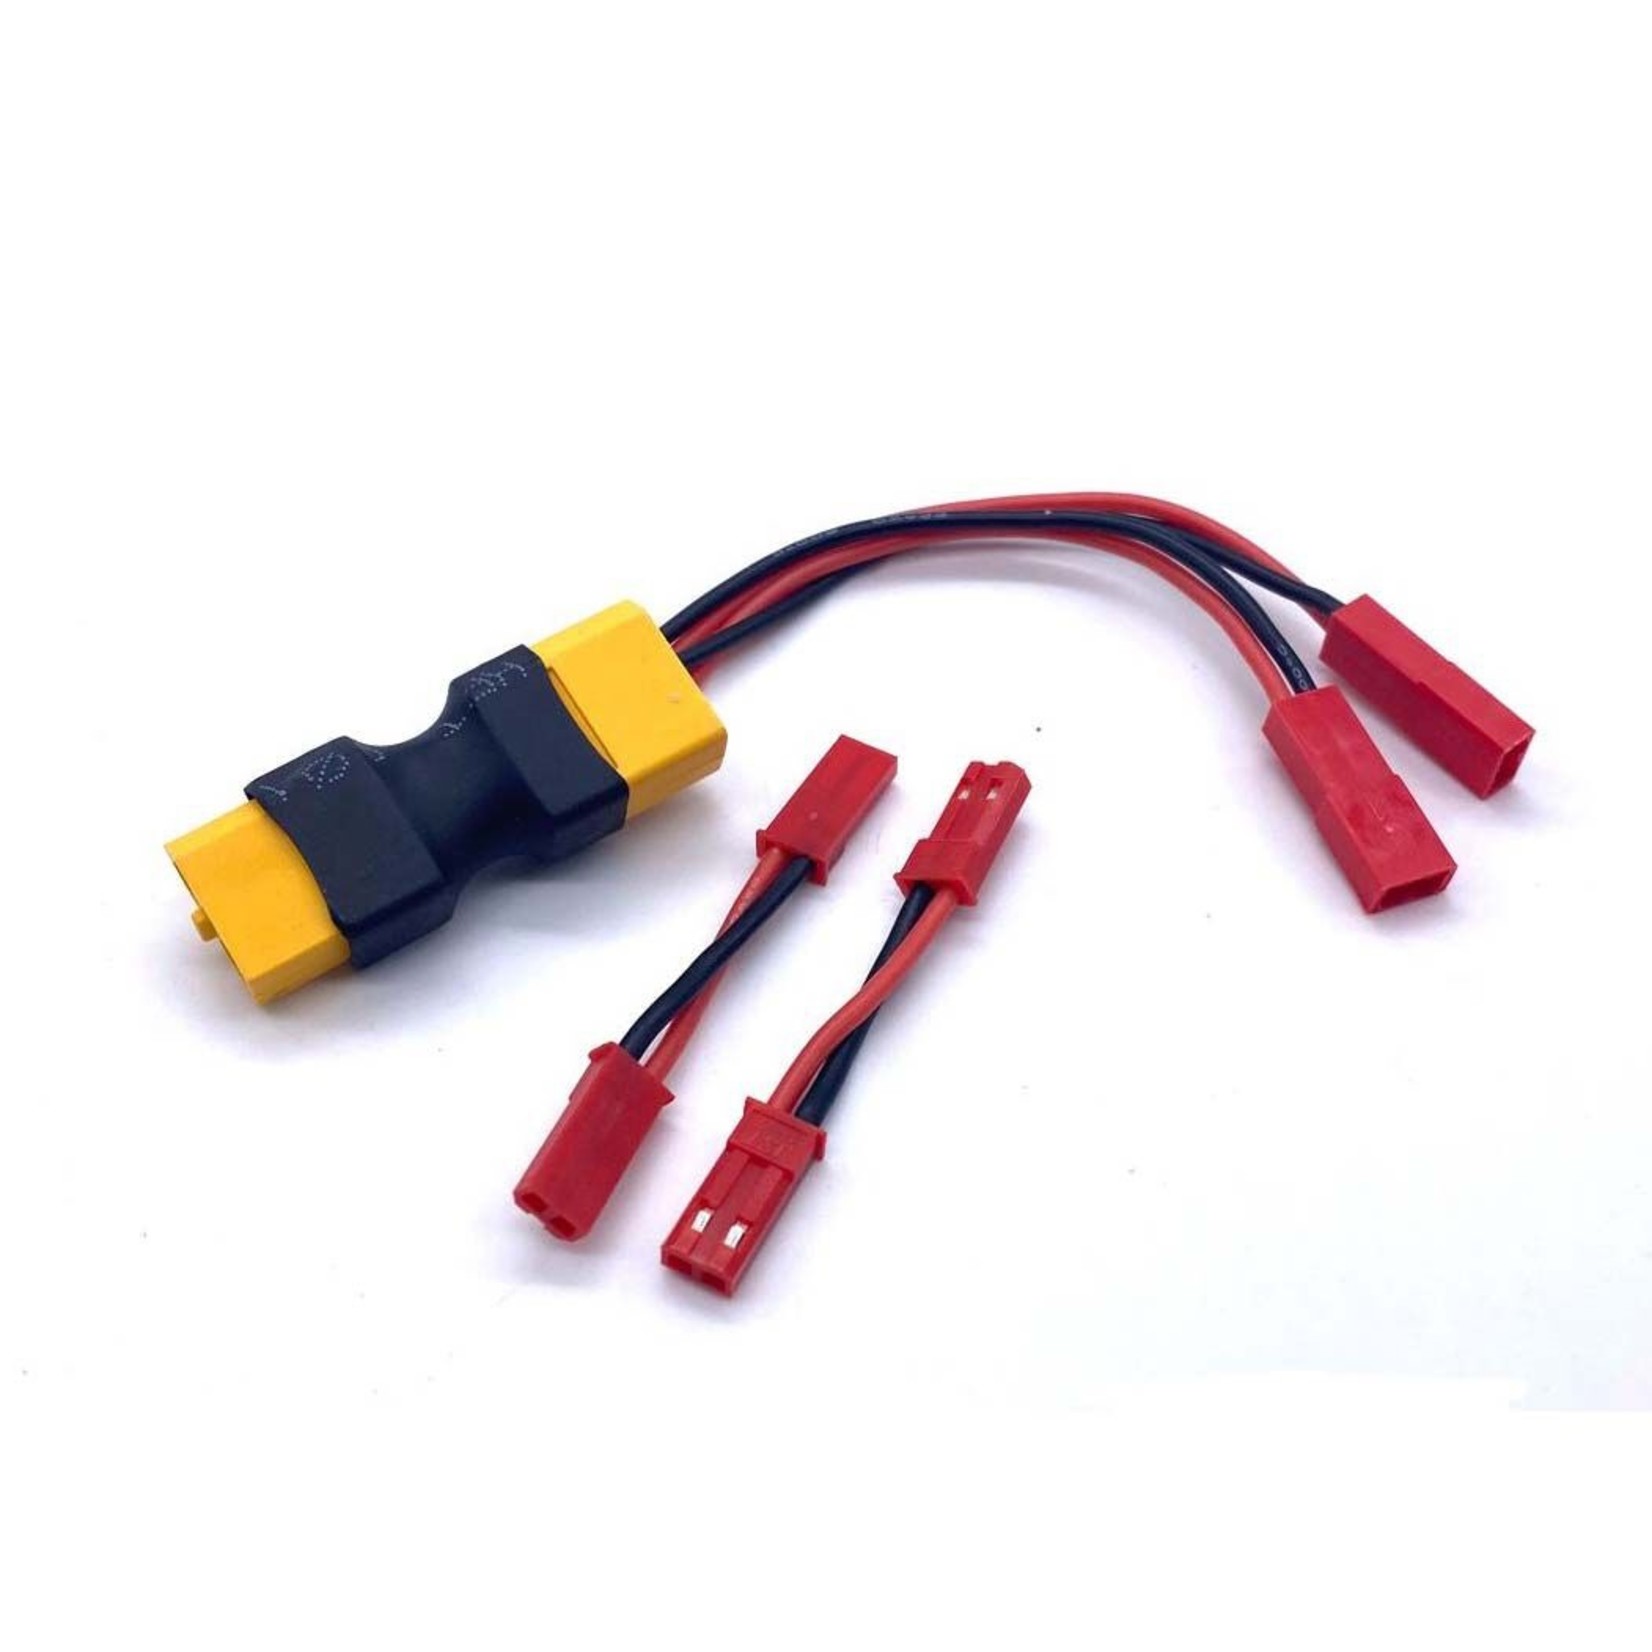 Reefs RC XT60 Dual JST Connector with 2 Male-Male Adaptors